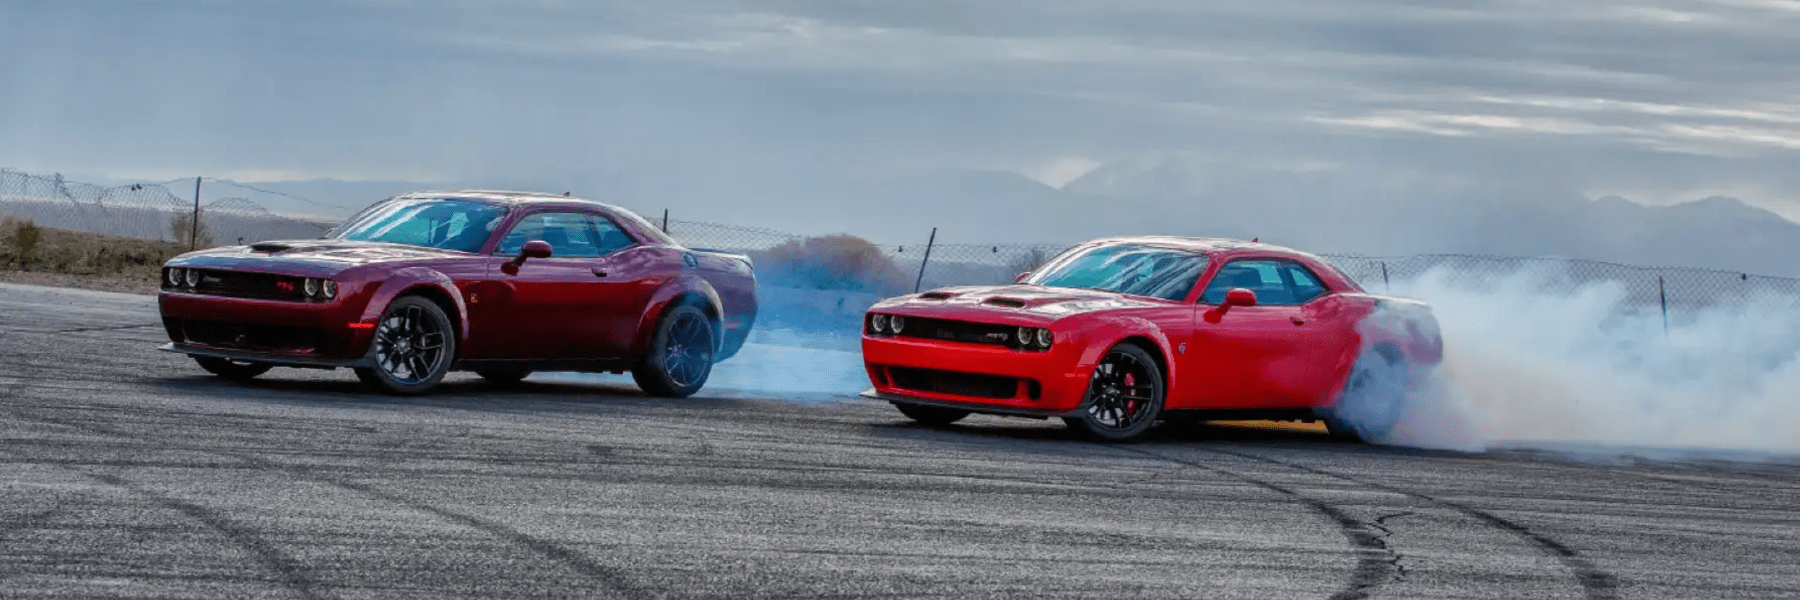 2022 Dodge Chargers racing each other